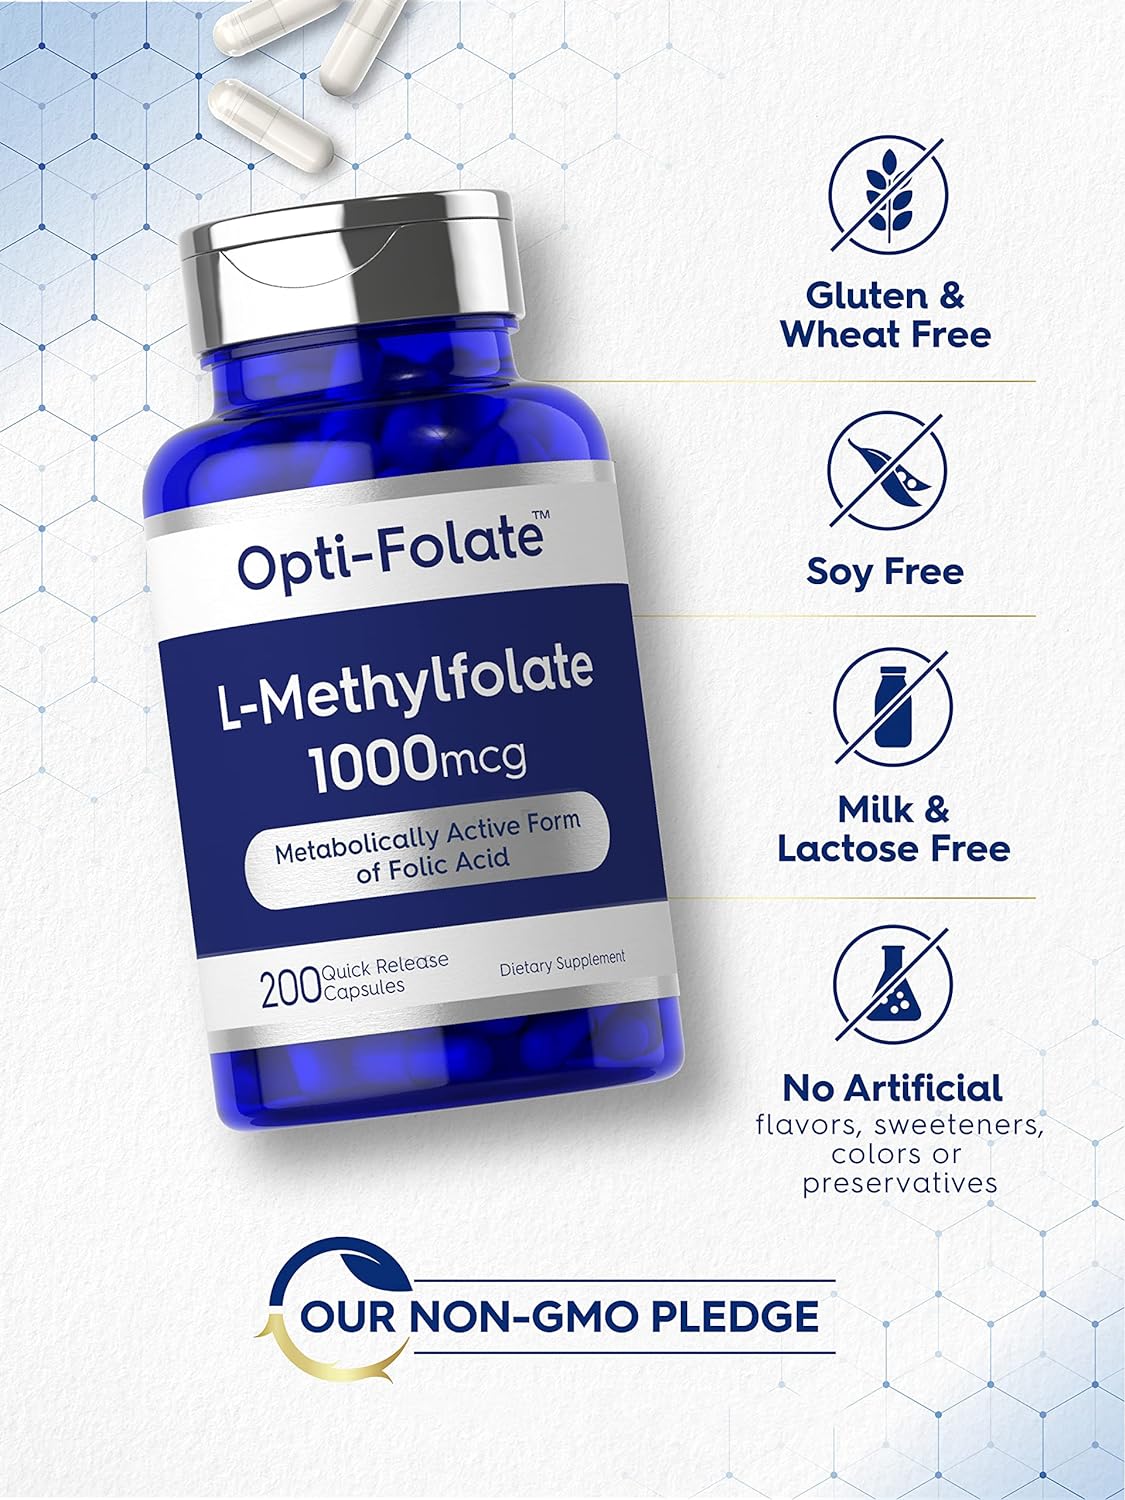 L Methylfolate 1000mcg | 200 Capsules | Value Size | Optimized and Act